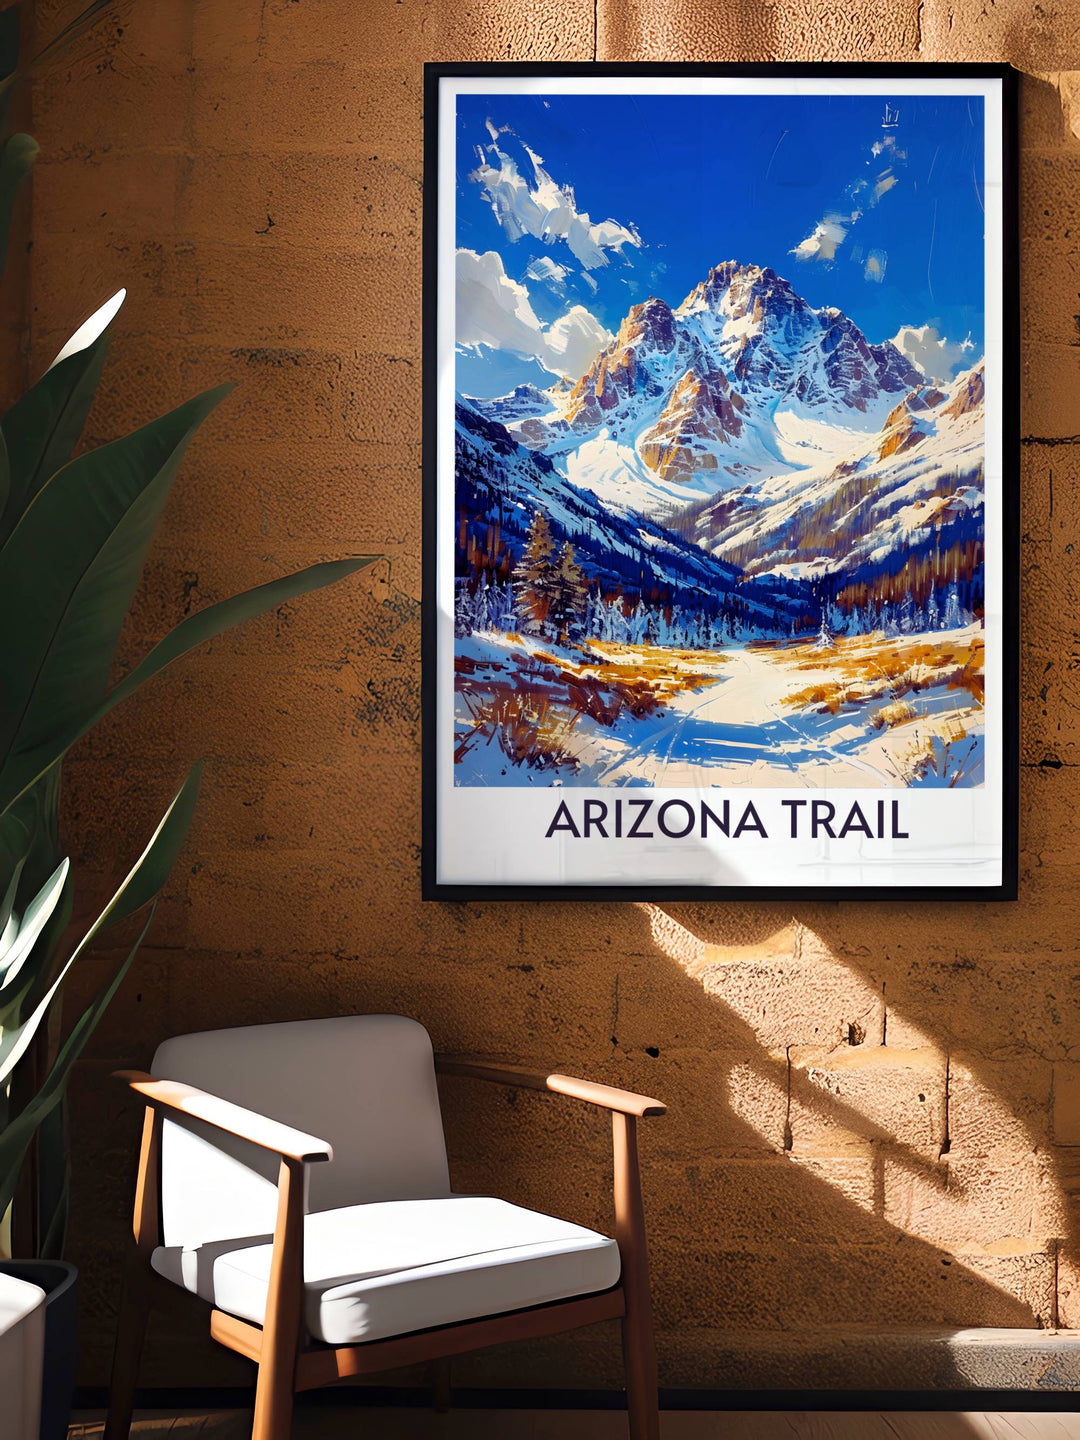 Arizona Trail print and San Francisco Peaks Park map designed for avid hikers and adventurers showcasing the beauty and challenge of these famous trails perfect for inspiring your next outdoor journey.